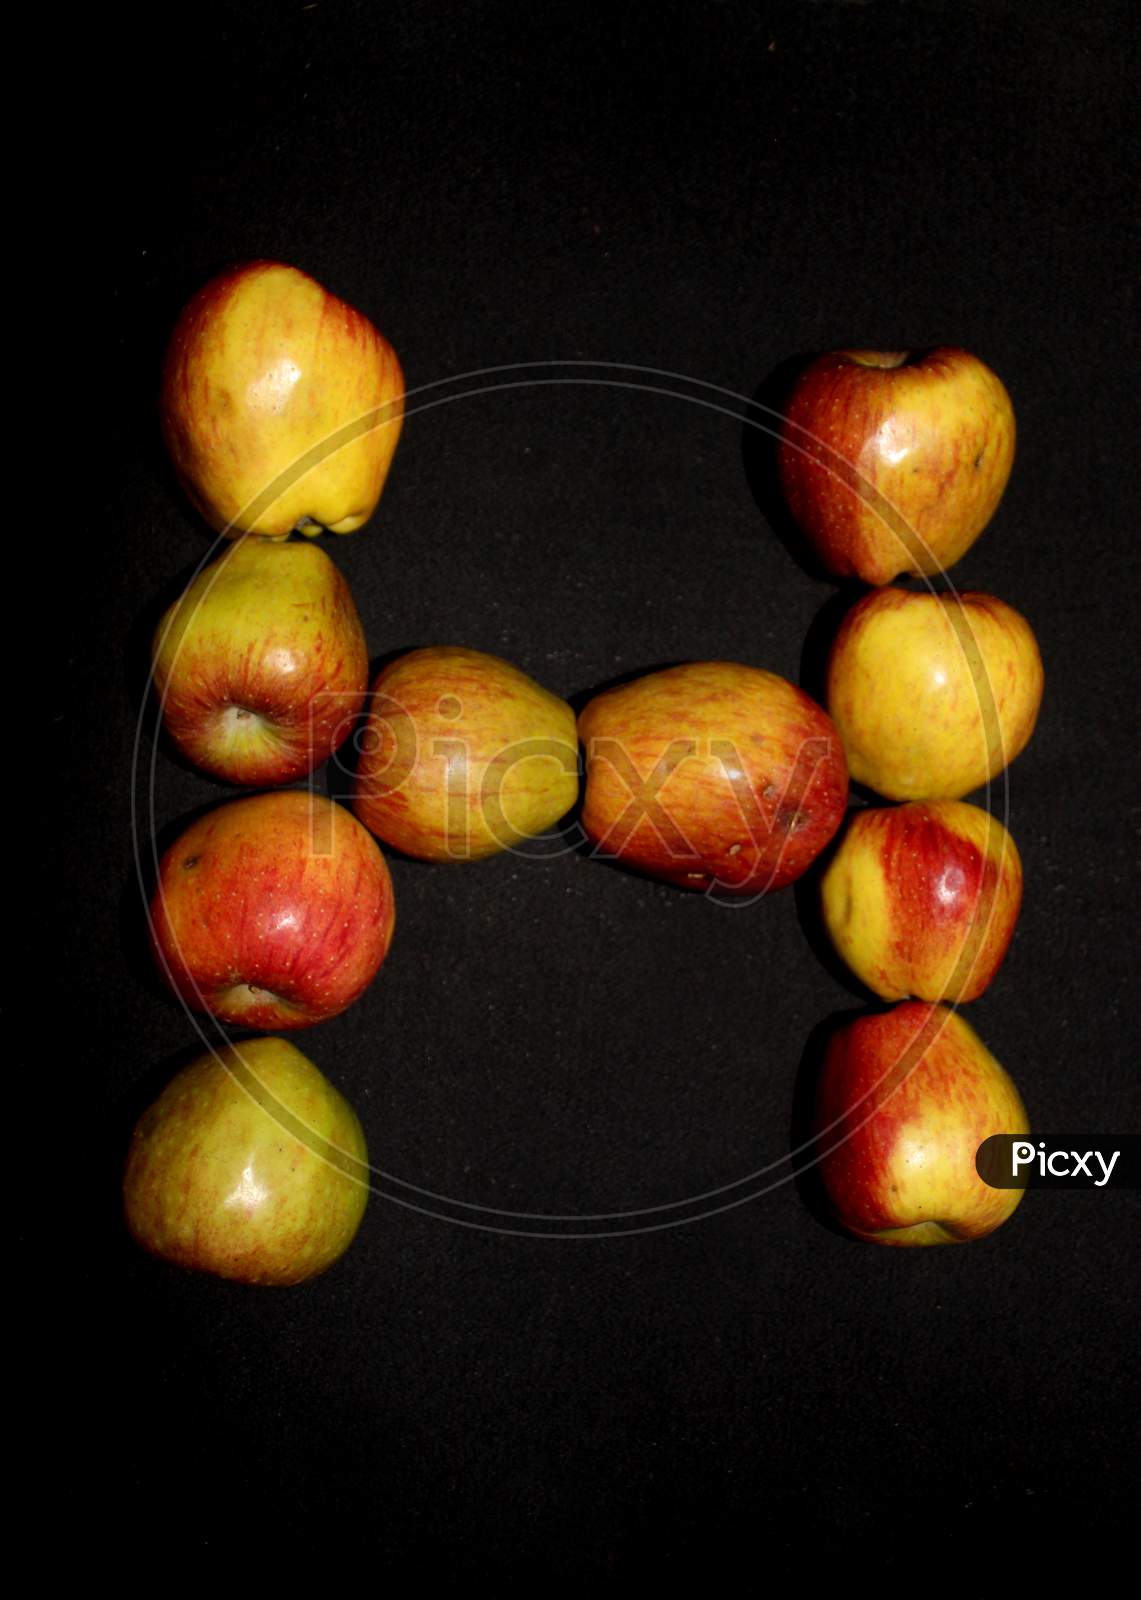 Alphabetical Letter H With Apples Over An isolated Black Background